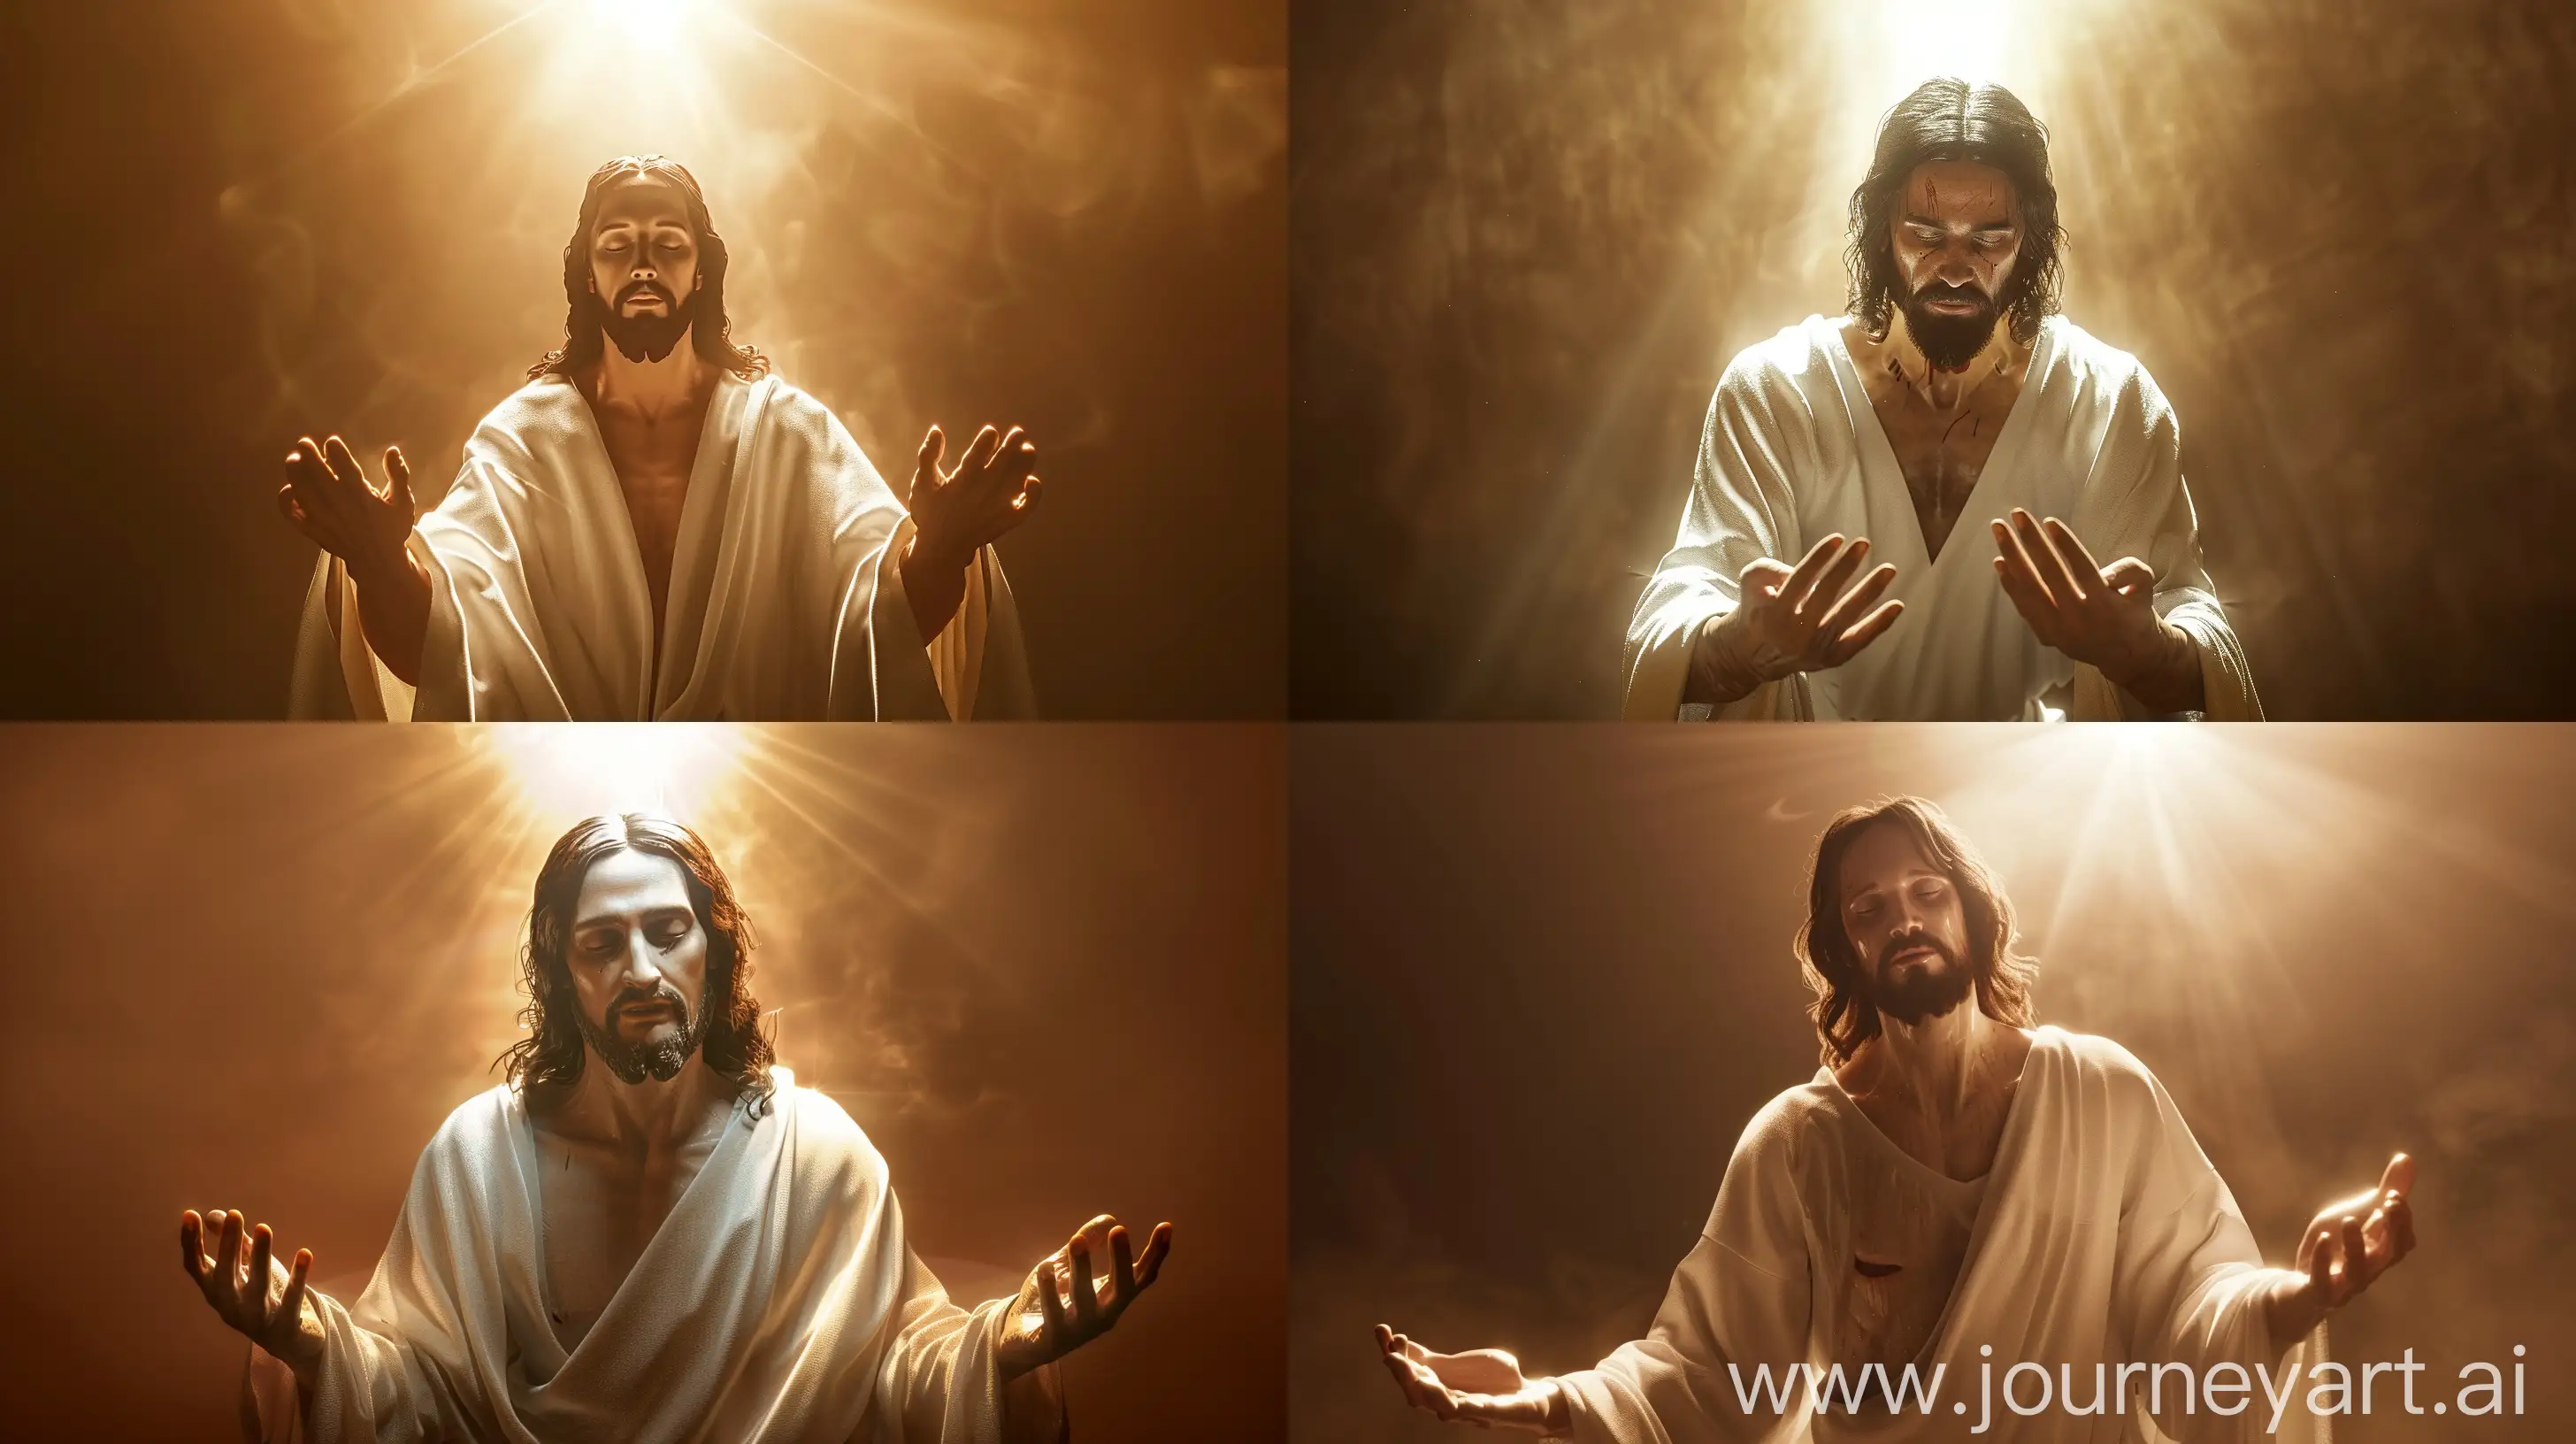 Photorealistic-Jesus-Holding-Out-Hands-in-Warm-Light